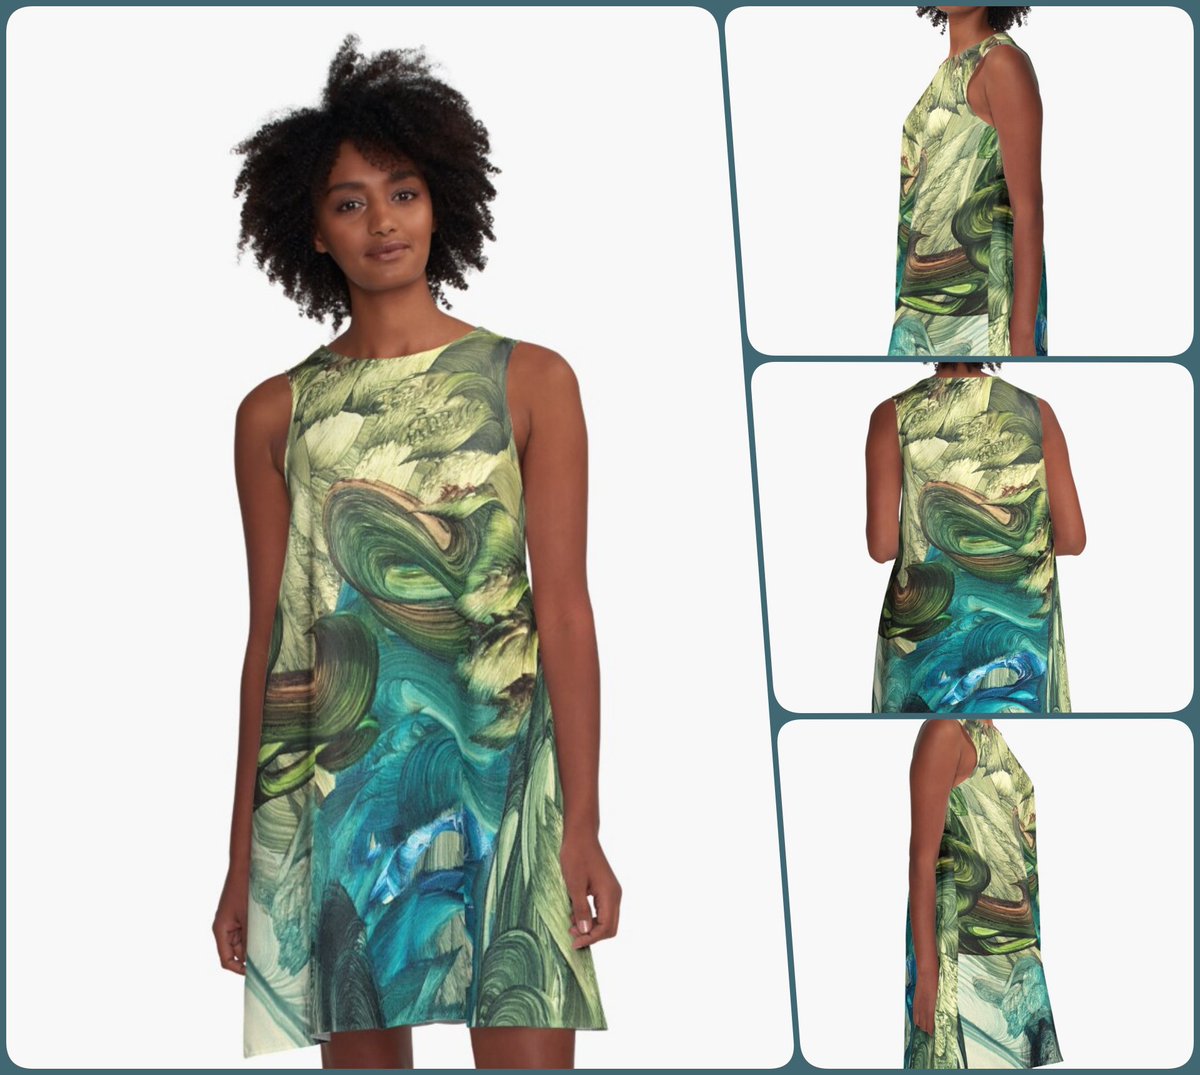 Seven of Wands A-Line Dress ~by Art Falaxy ~Be Artful~ #redbubble #accessories #fashion #art #artfalaxy #backpacks #bags #drawstring #duffel #trendy #FindYourThing #teal #blue #green #yellow redbubble.com/i/dress/Seven-…